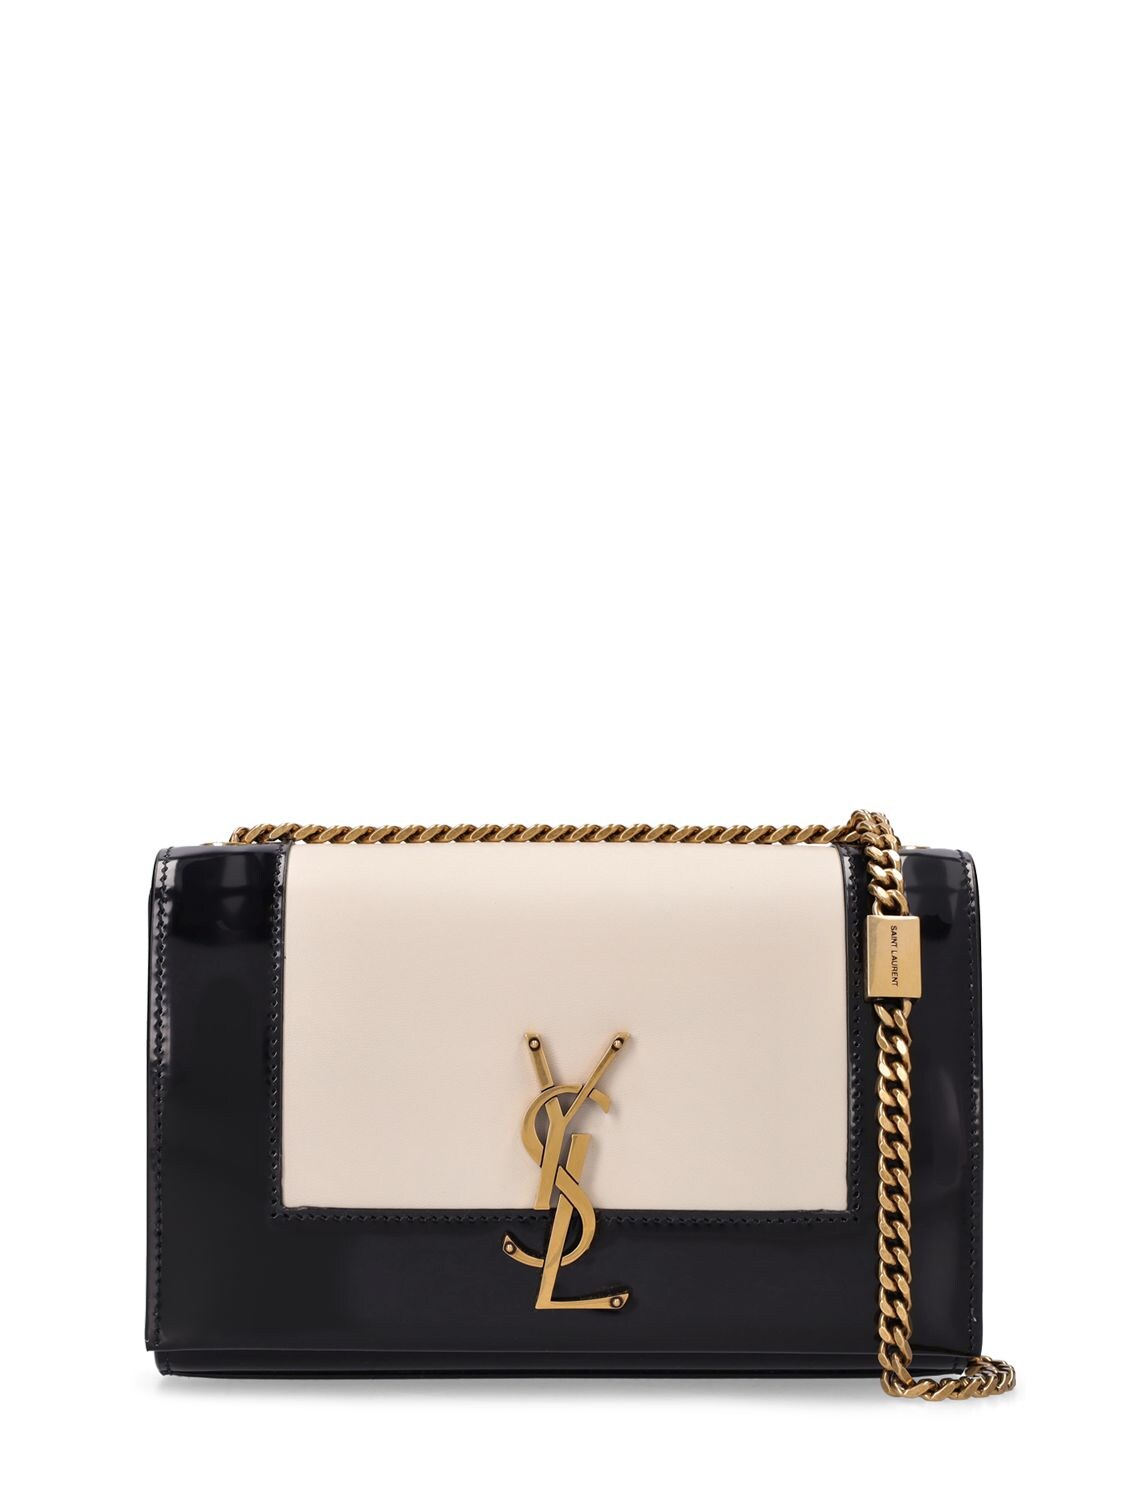 SAINT LAURENT SMALL KATE BRUSHED LEATHER CHAIN BAG